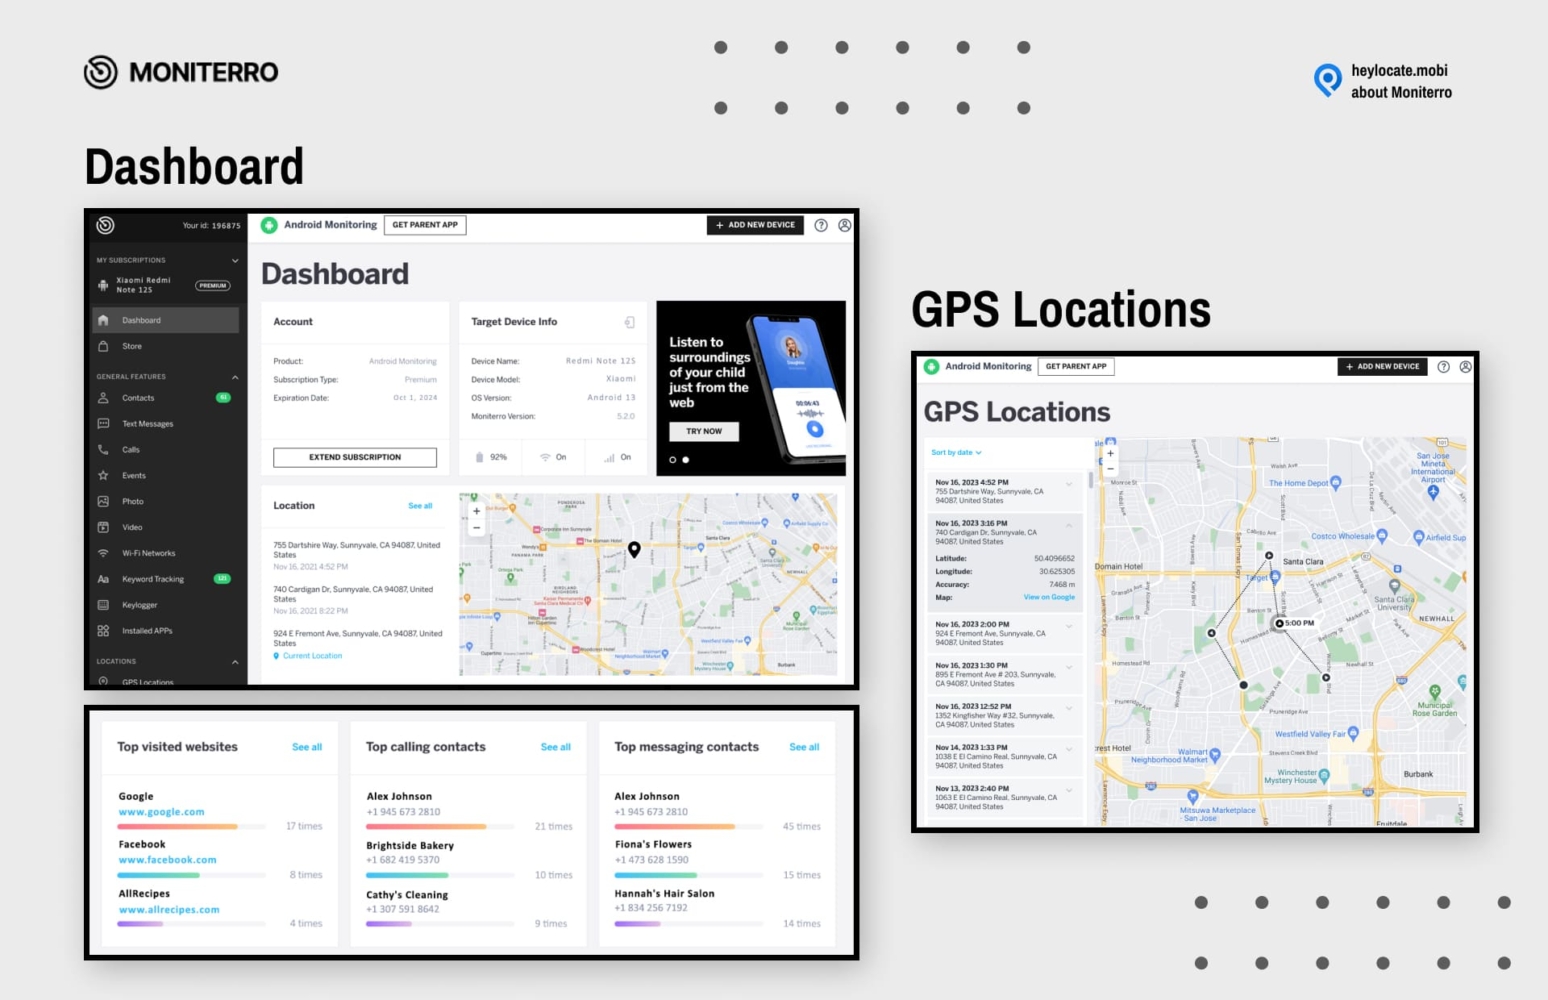 Screenshot of MONITERRO's user dashboard and GPS Locations feature. The left side shows the dashboard interface with account details, subscription information, and sections for calls, messages, events, photos, video, Wi-Fi networks, and visited websites. The right side displays the GPS Locations screen with a map showing location markers and a list of location logs with timestamps, addresses, latitude, and longitude coordinates.